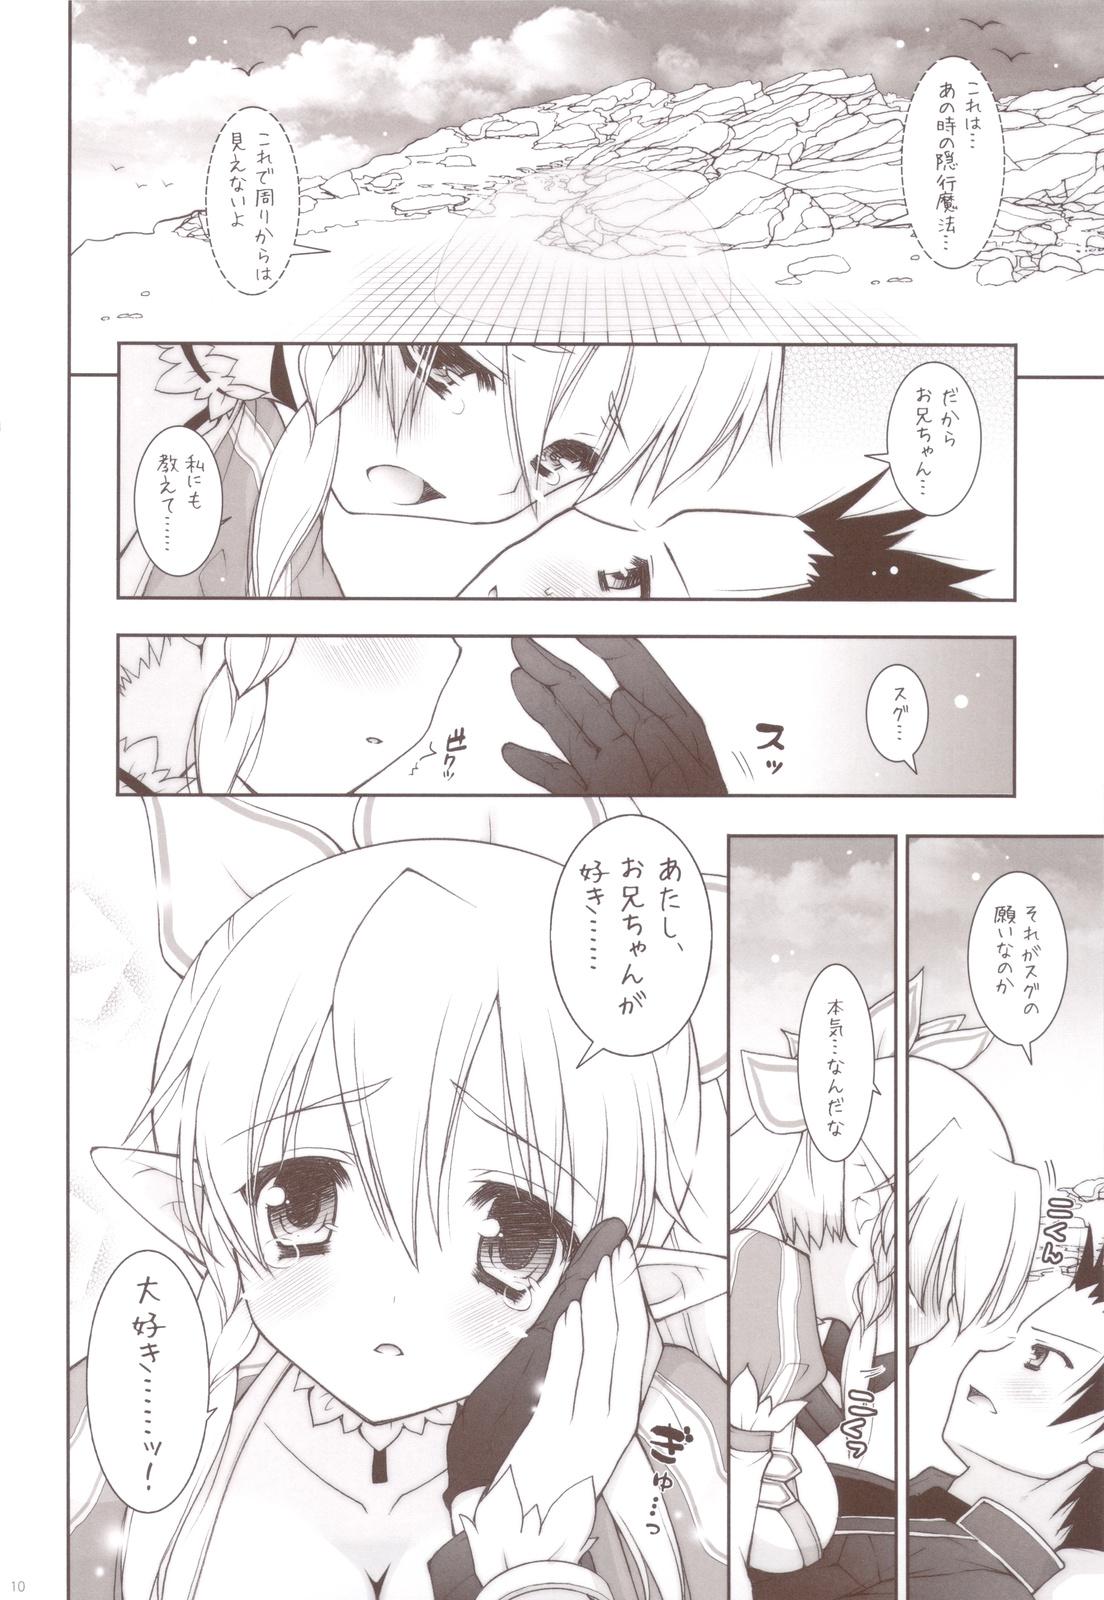 Bigbooty Sex And Oppai + Omake Bon - Sword art online Oldyoung - Page 9